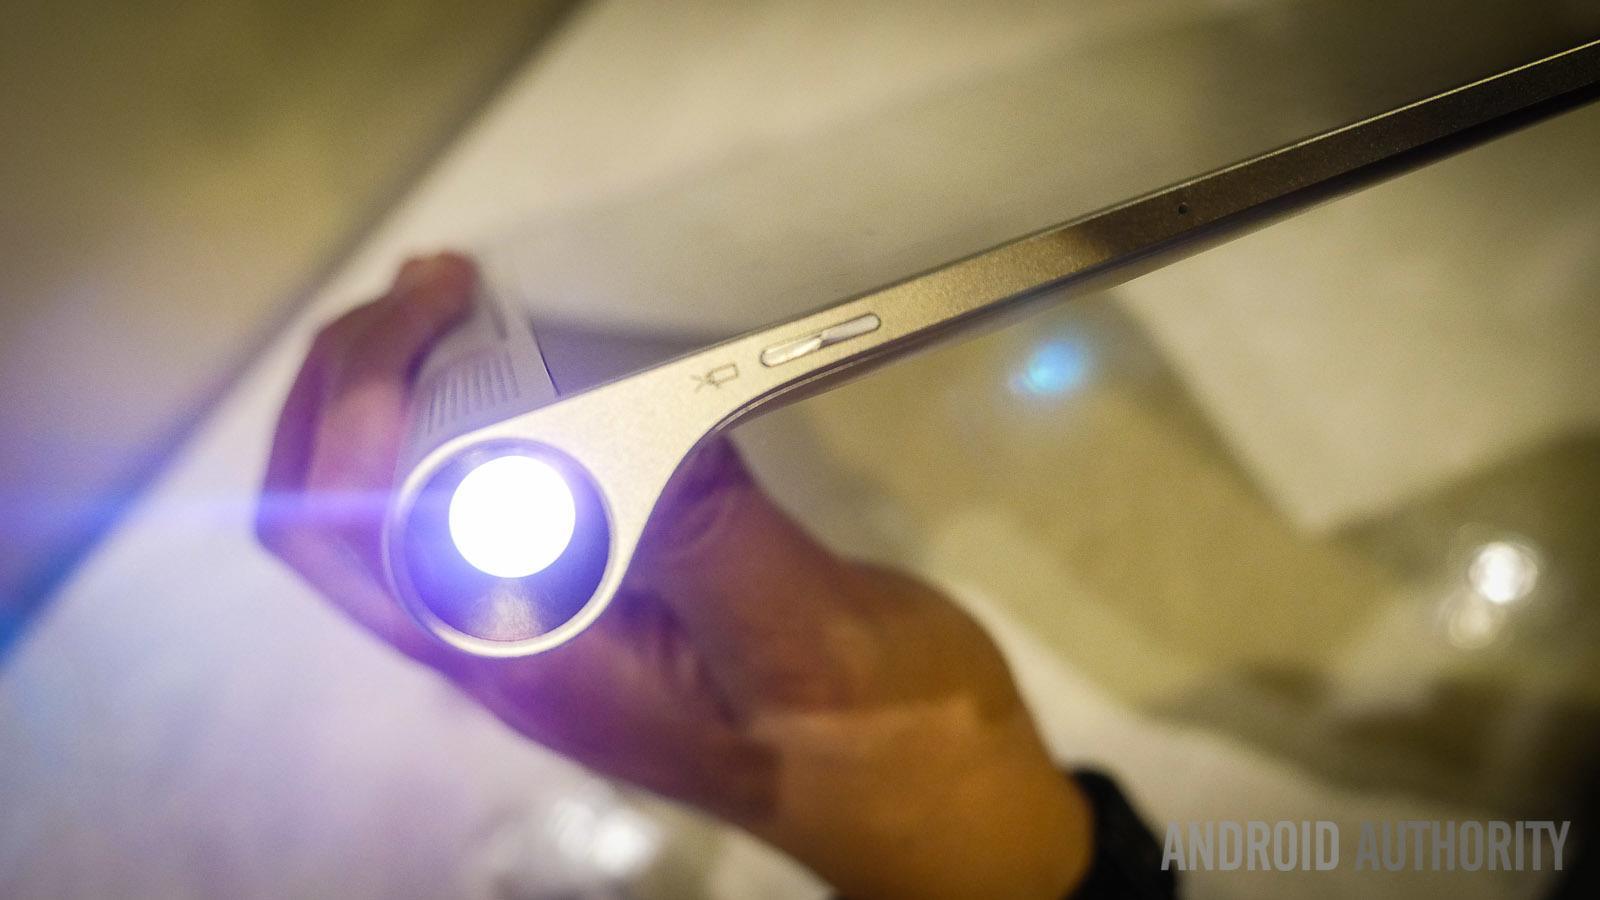 lenovo yoga tablet 2 pro first look aa (19 of 19)